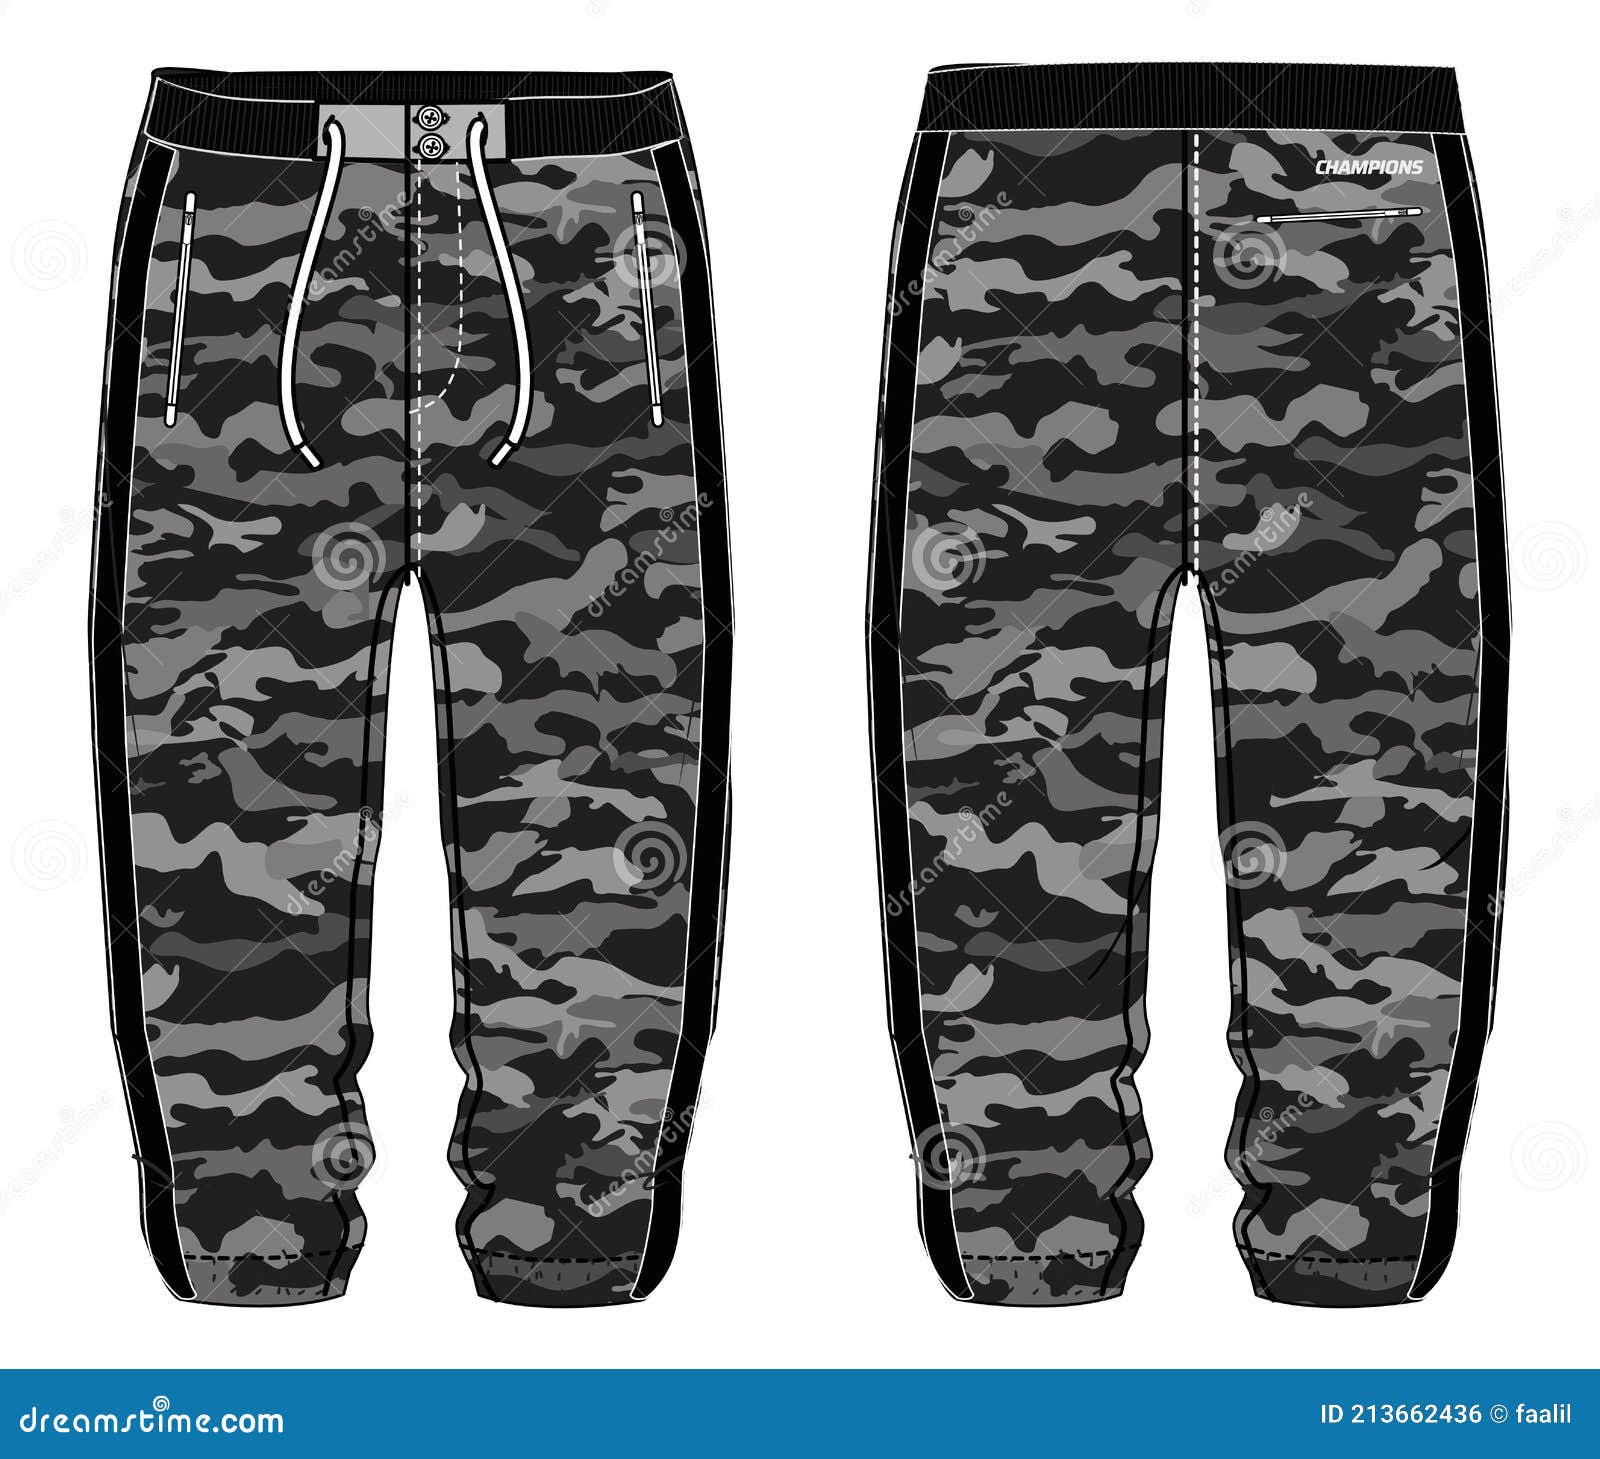 Camouflage Three Quarter Shorts Design Concept Vector Template